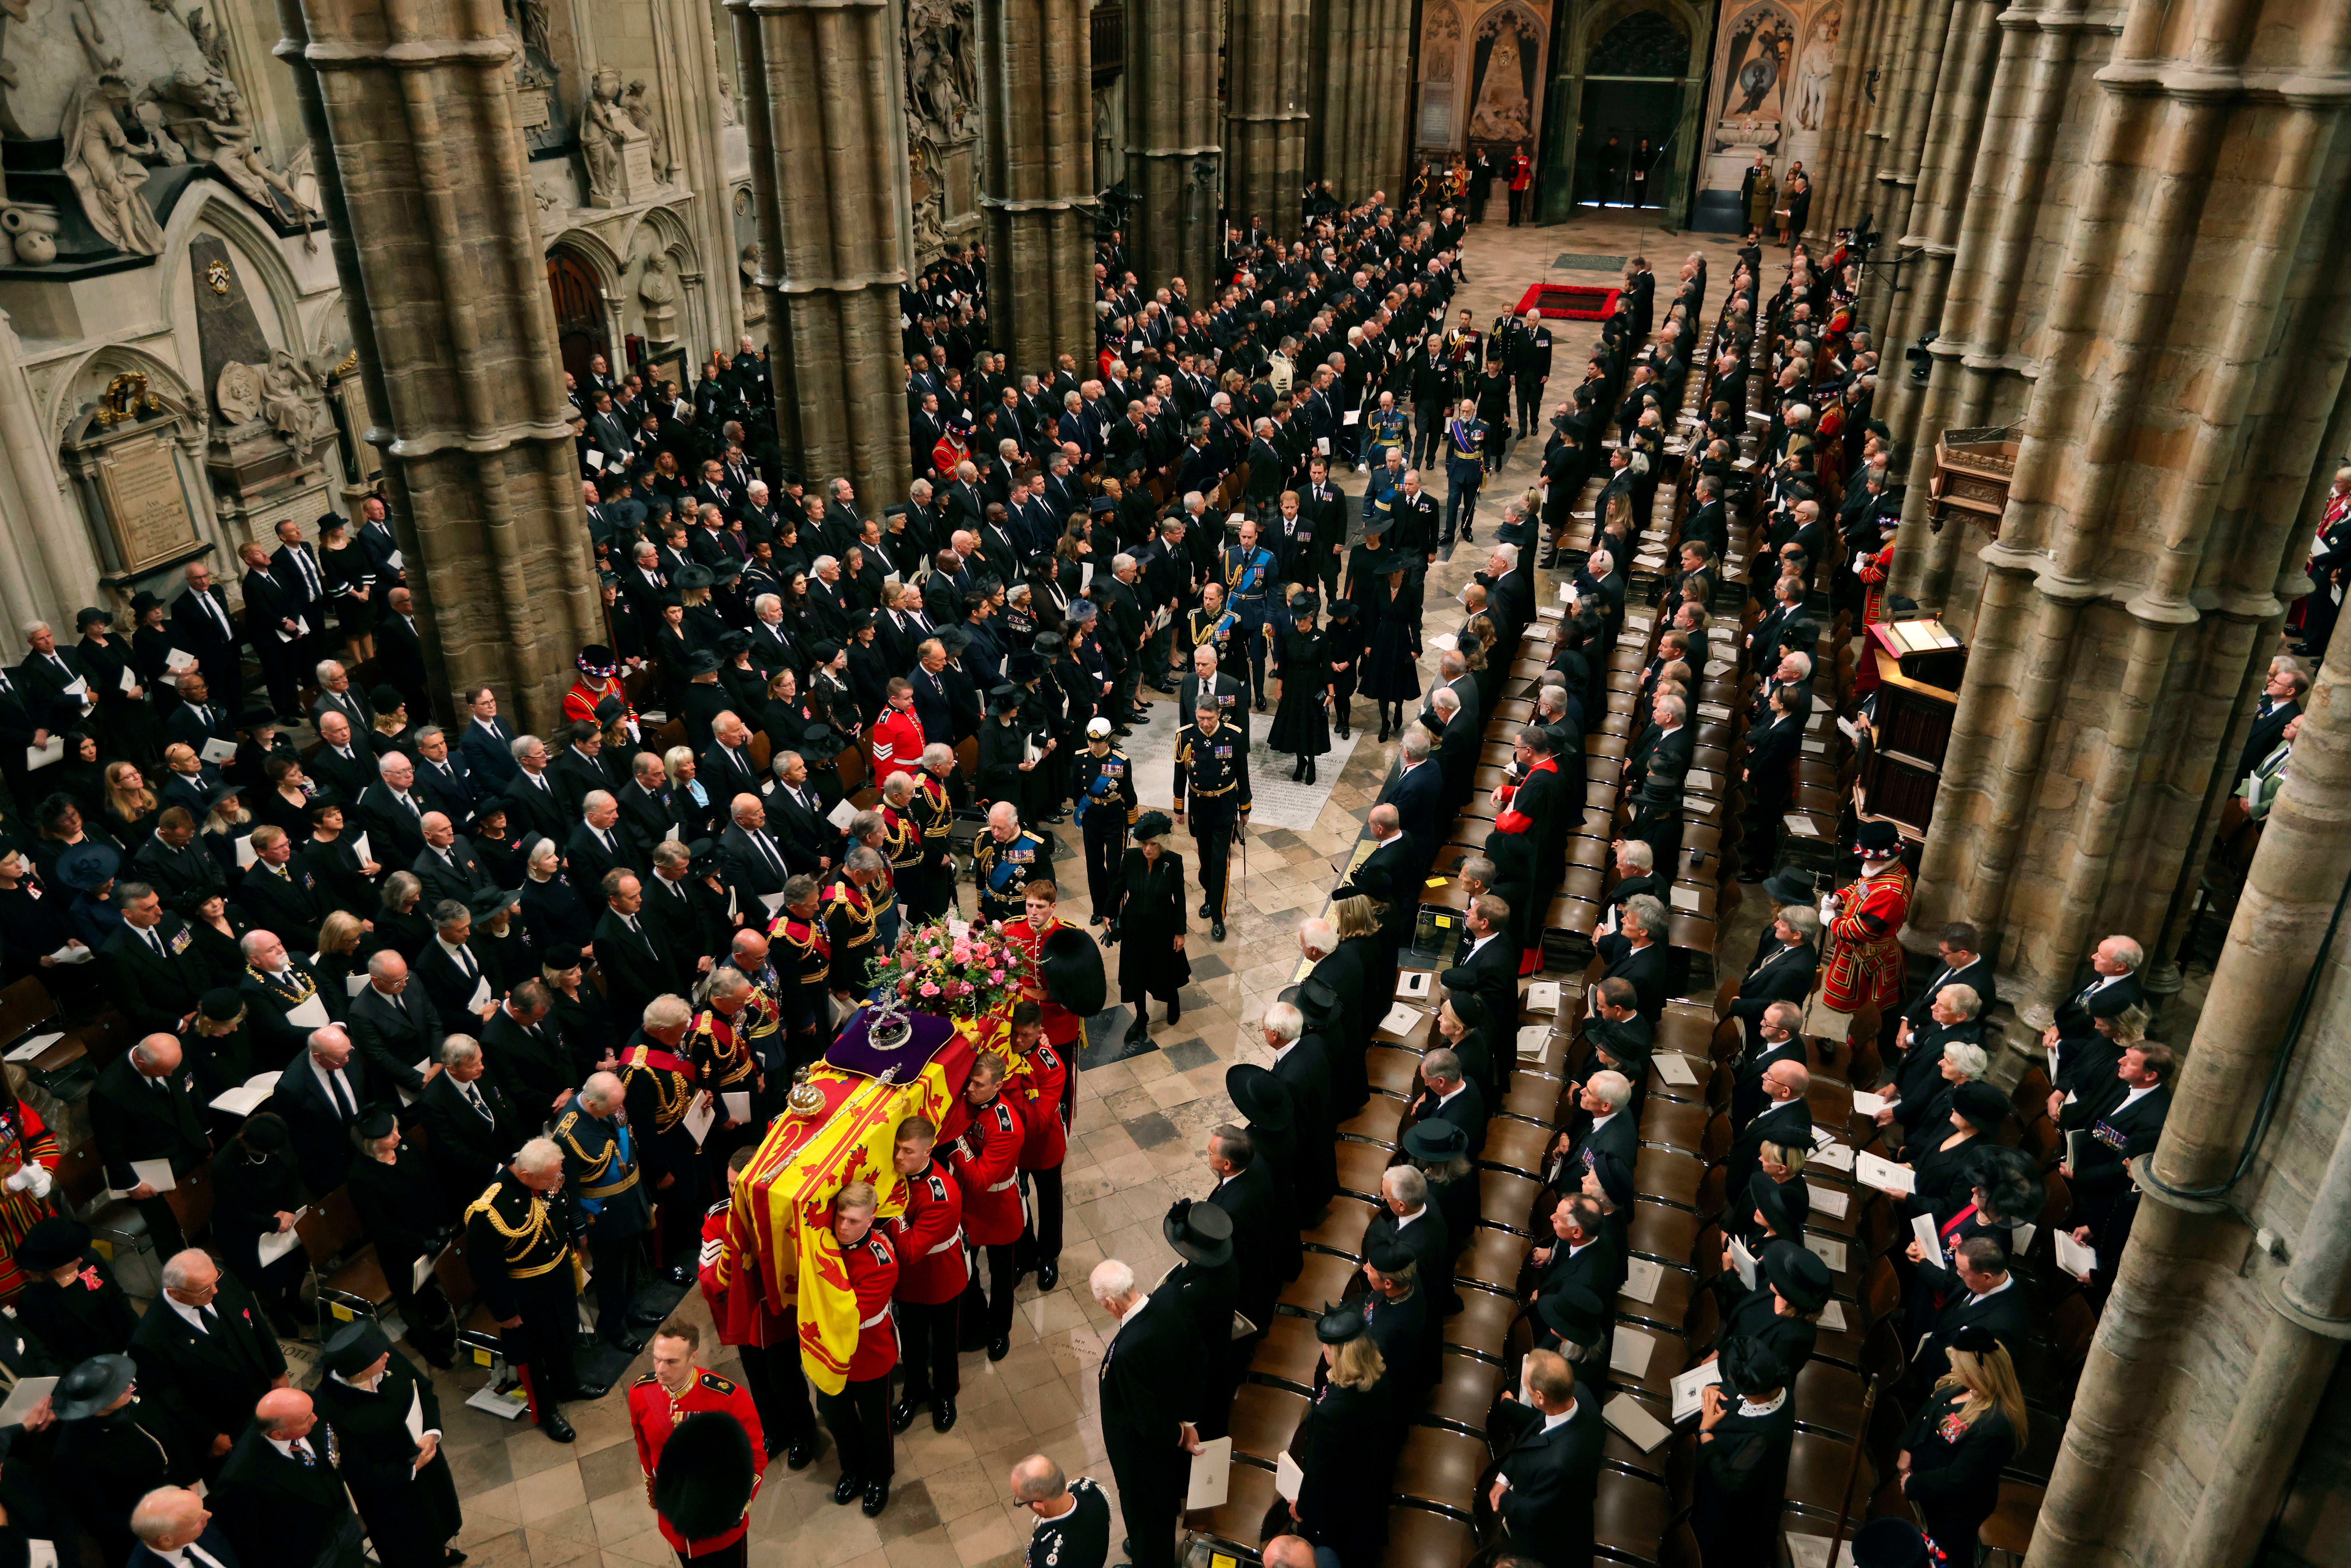 The Duke of Norfolk was responbile for planning the Queen’s state funeral